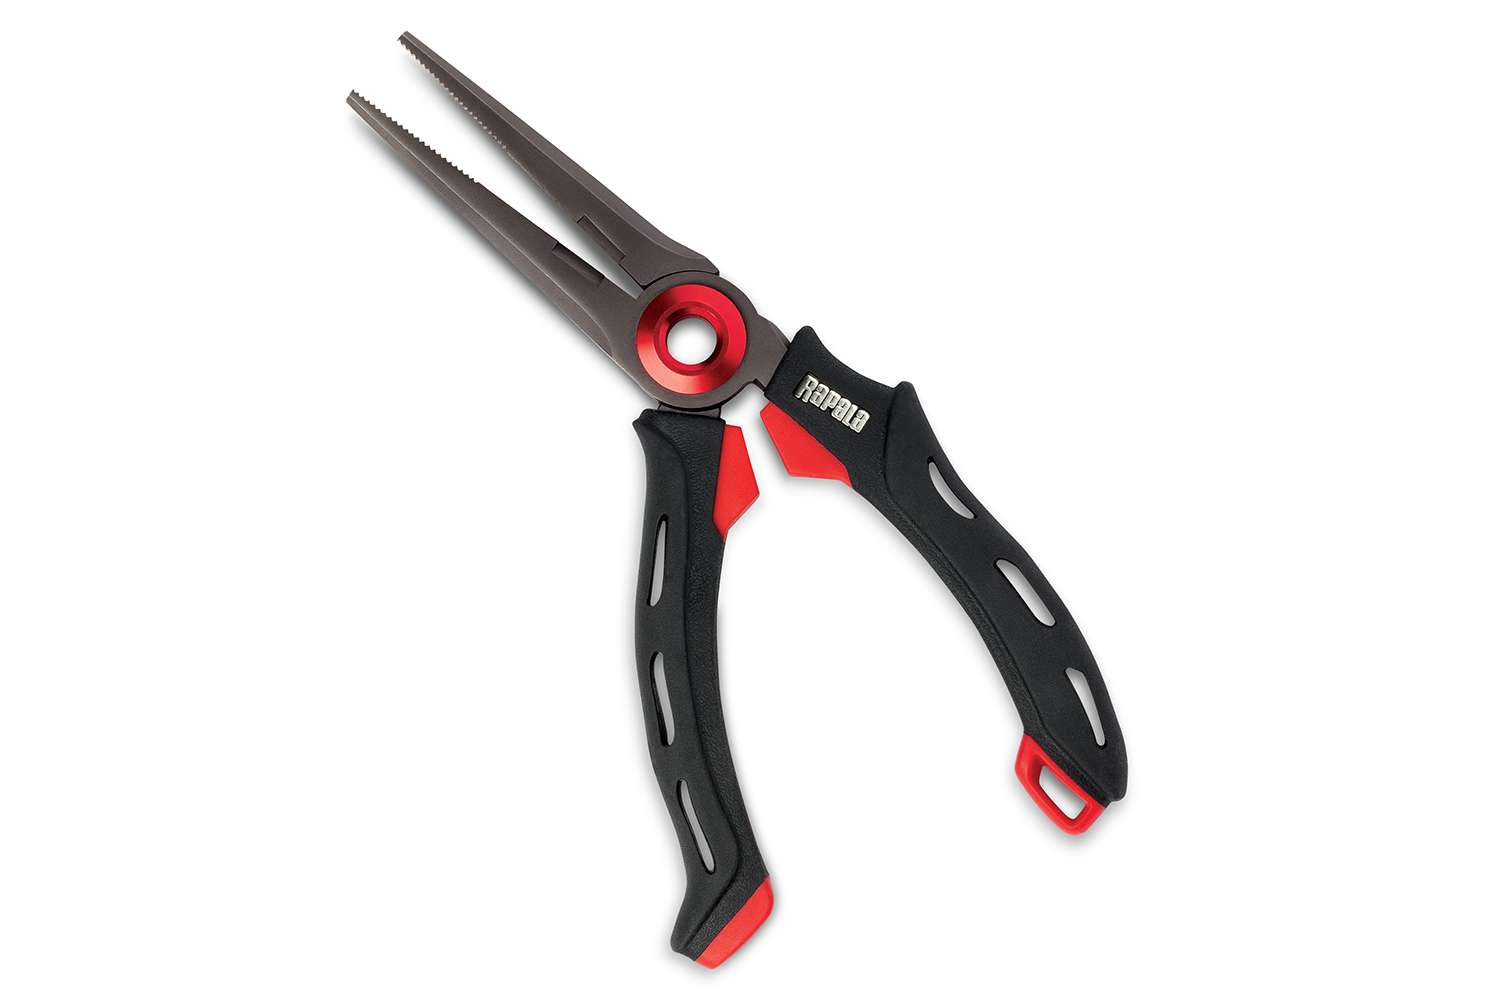 Rapala Mag Spring Pliers (4-, 6- and 8-inch models),
$24.99
